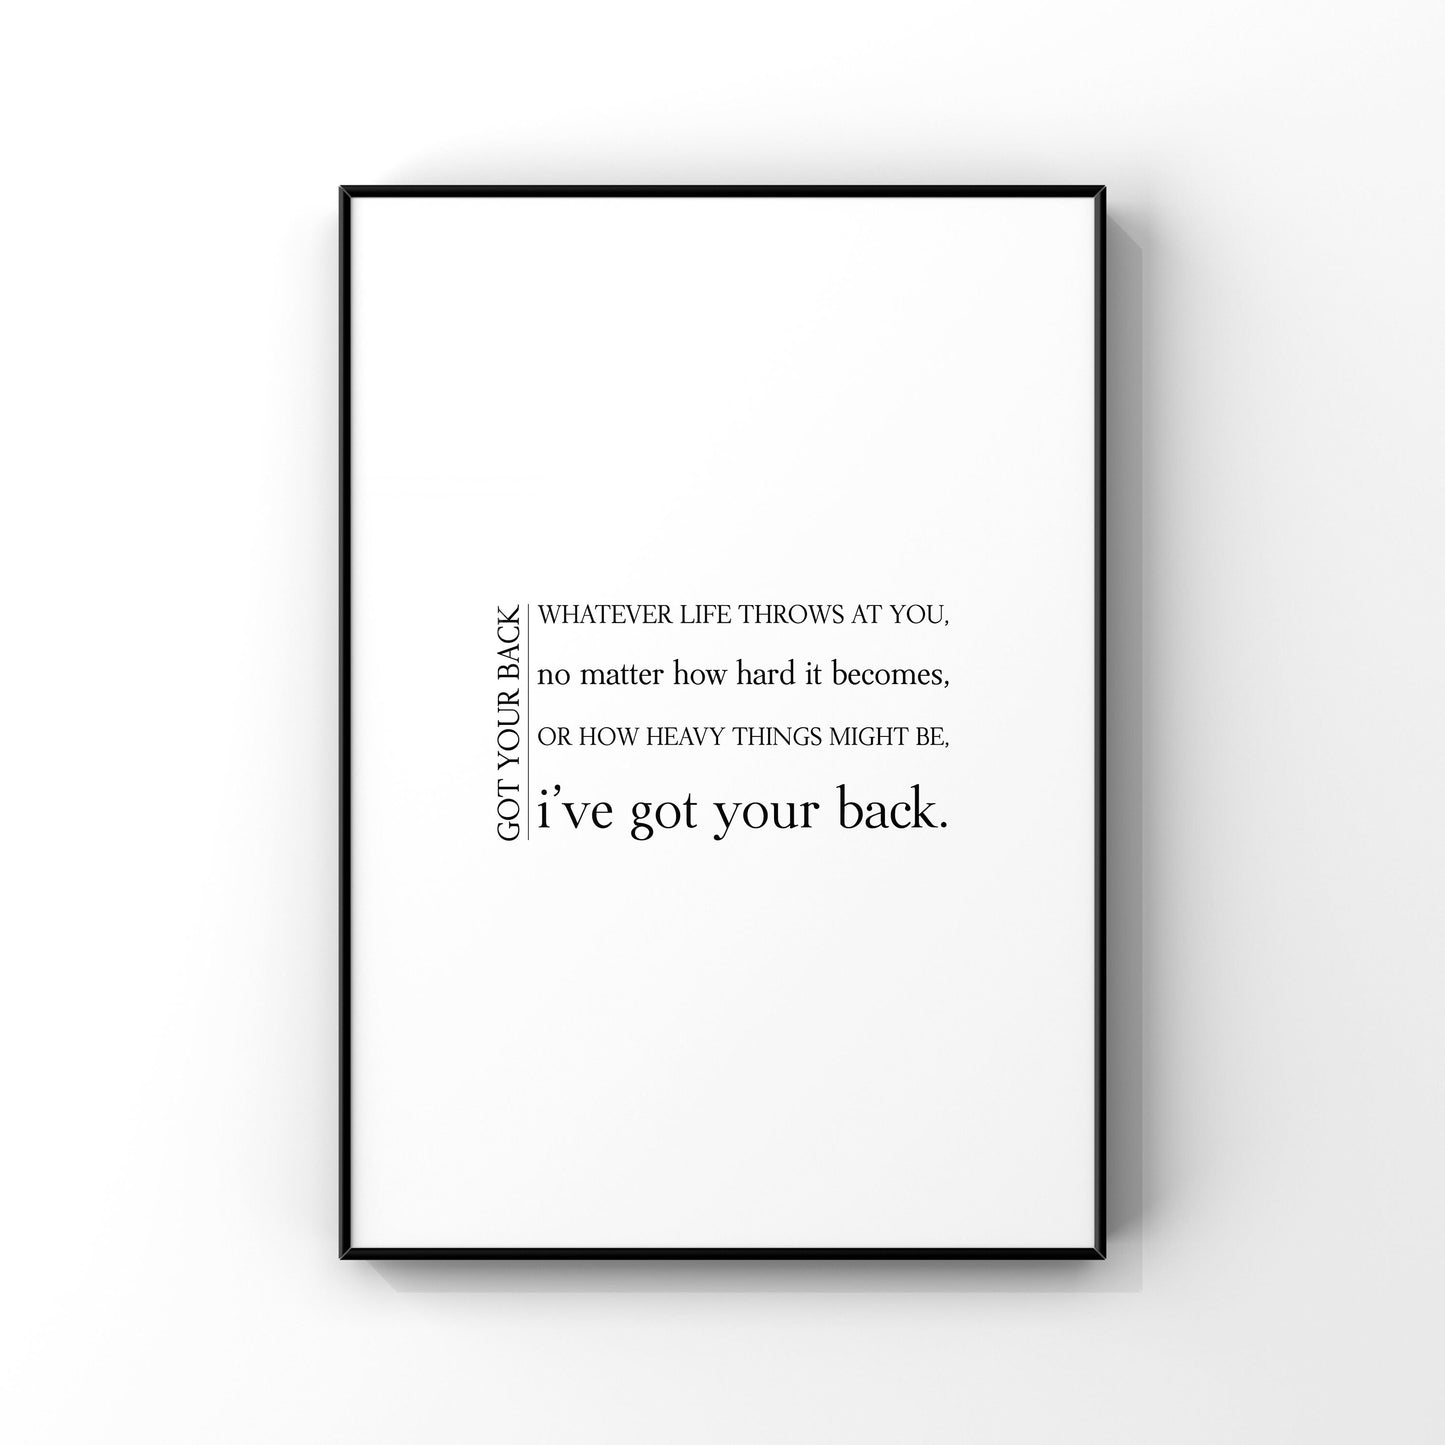 Got your back,Got your back definition,Definition print,Anniversary gift,Gift for spouse,Gift for friend,Best friend gift,Friendship gift